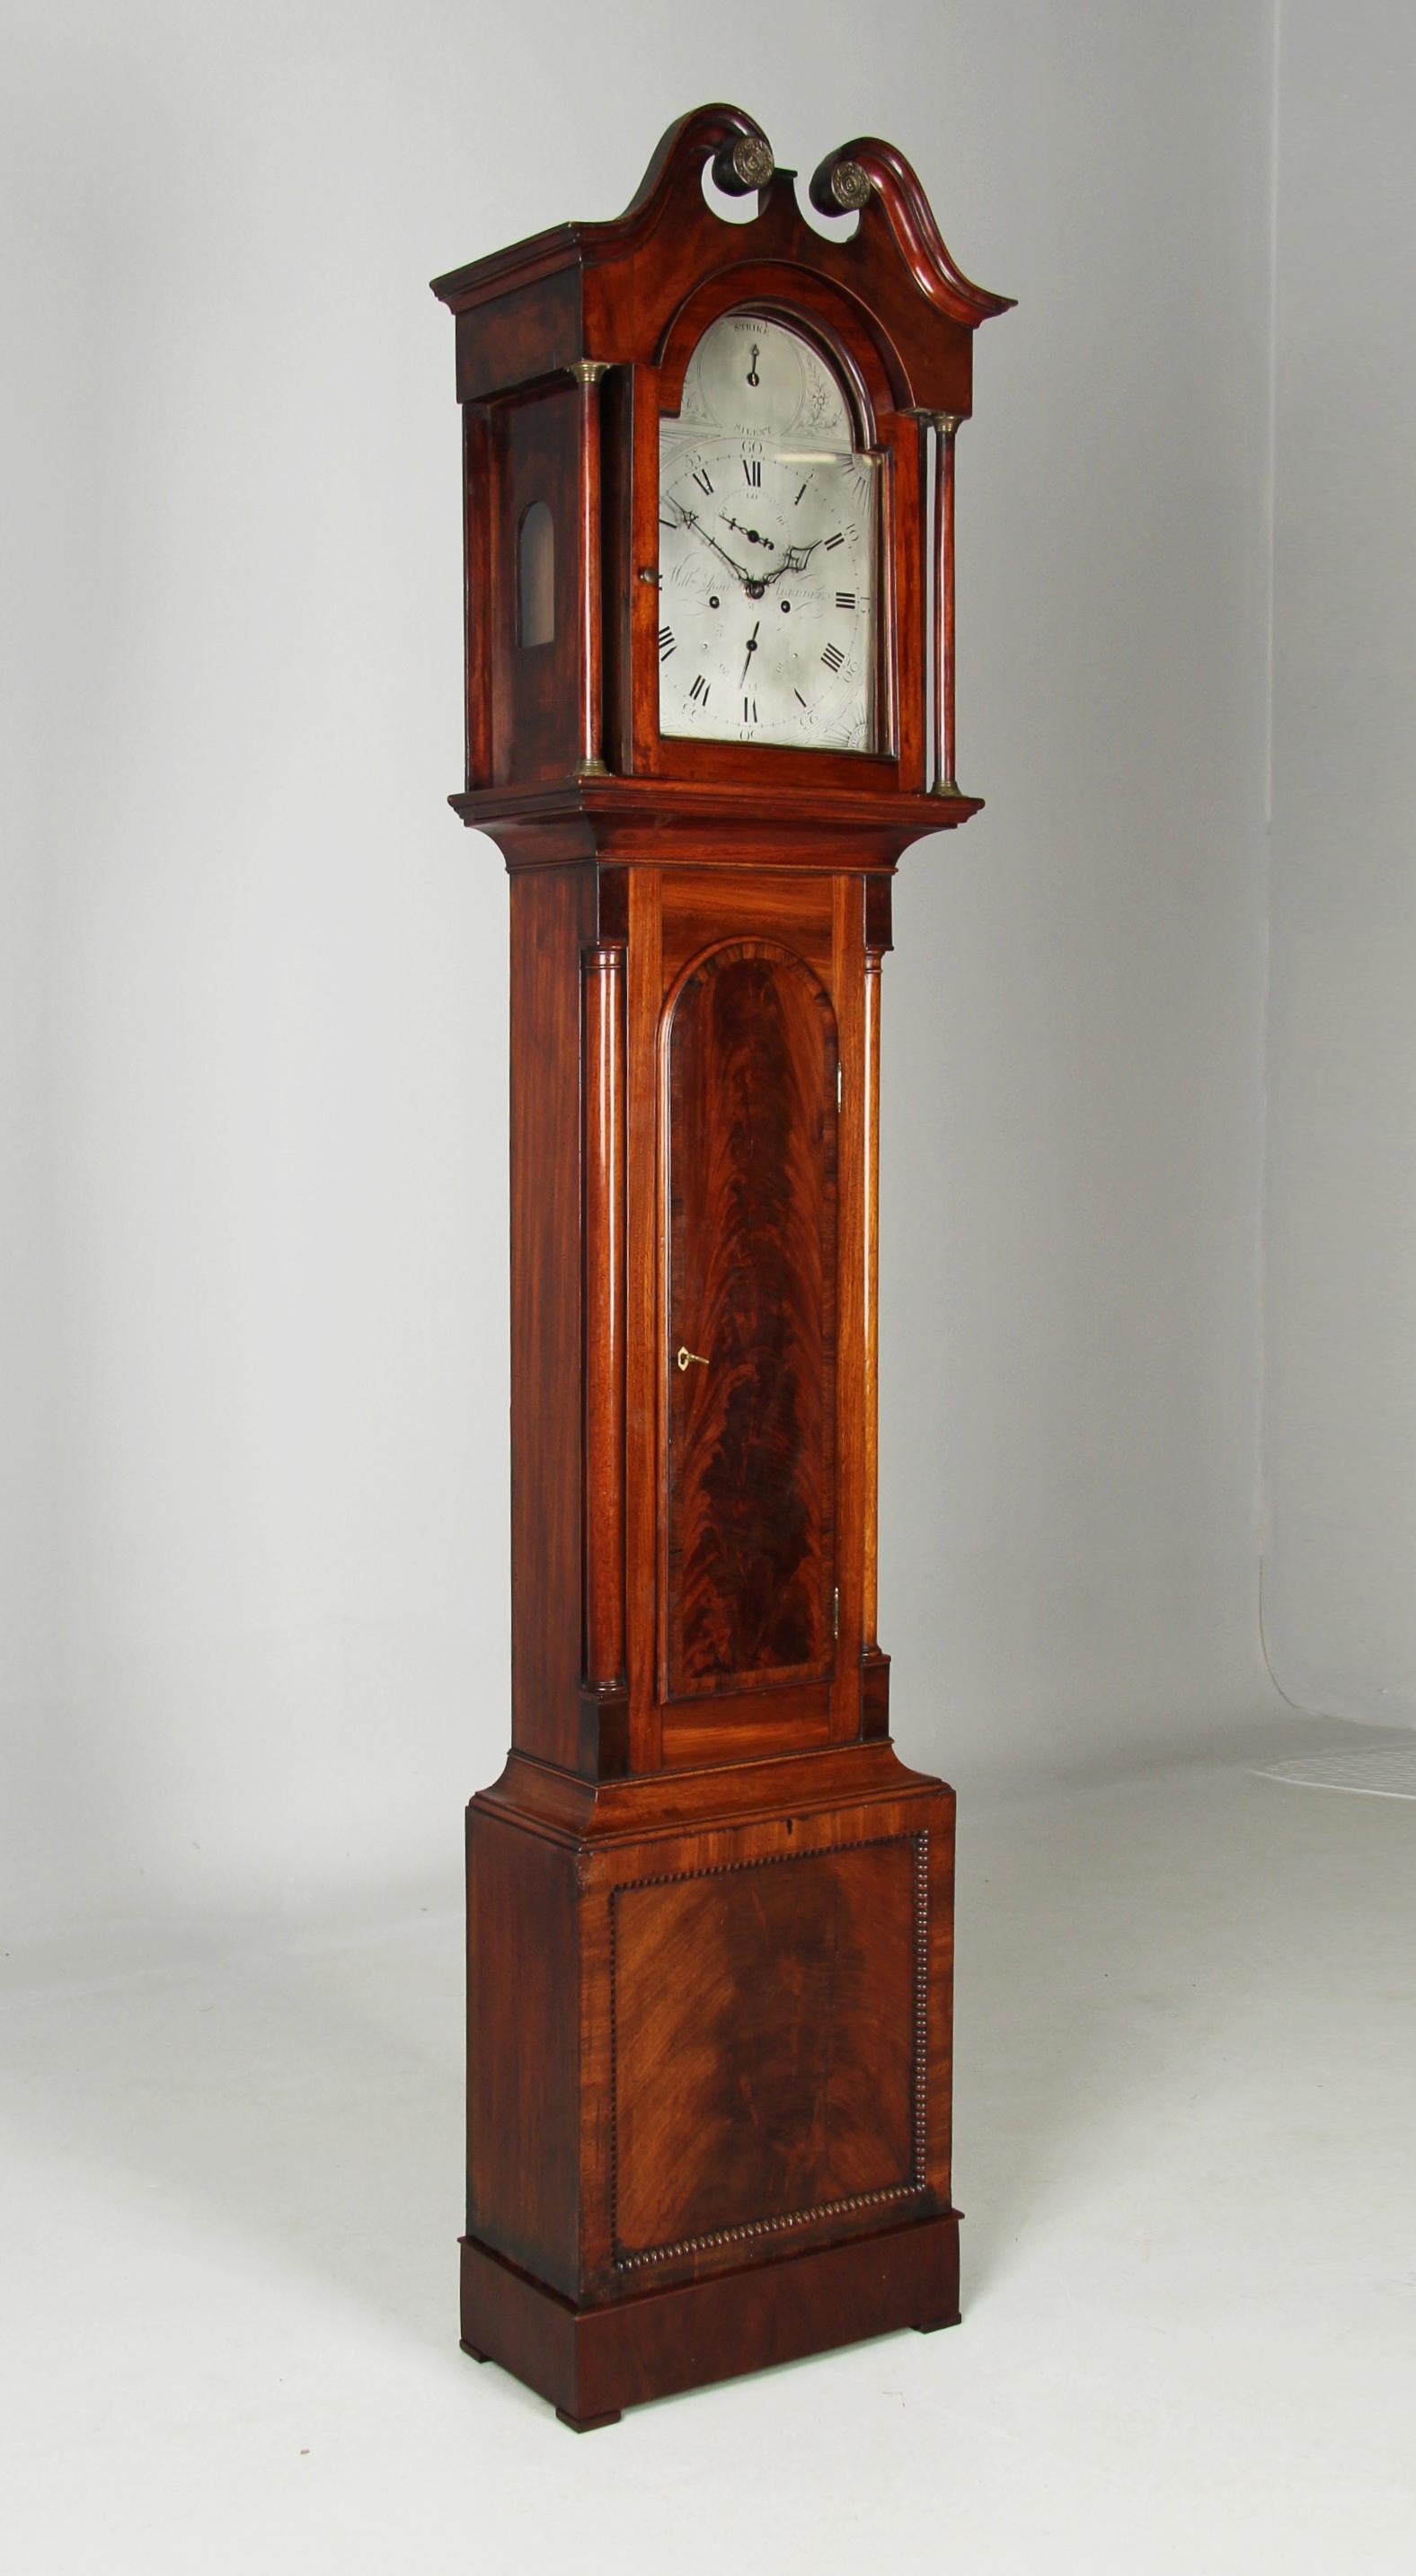 George III grandfather clock with silver-plated dial

Scotland (Aberdeen)
Mahogany
George III around 1820

Dimensions: H x W x D: 222 x 47 x 23 cm

Description:
Beautiful antique Scottish grandfather clock in an elegant and slender clock case.
The